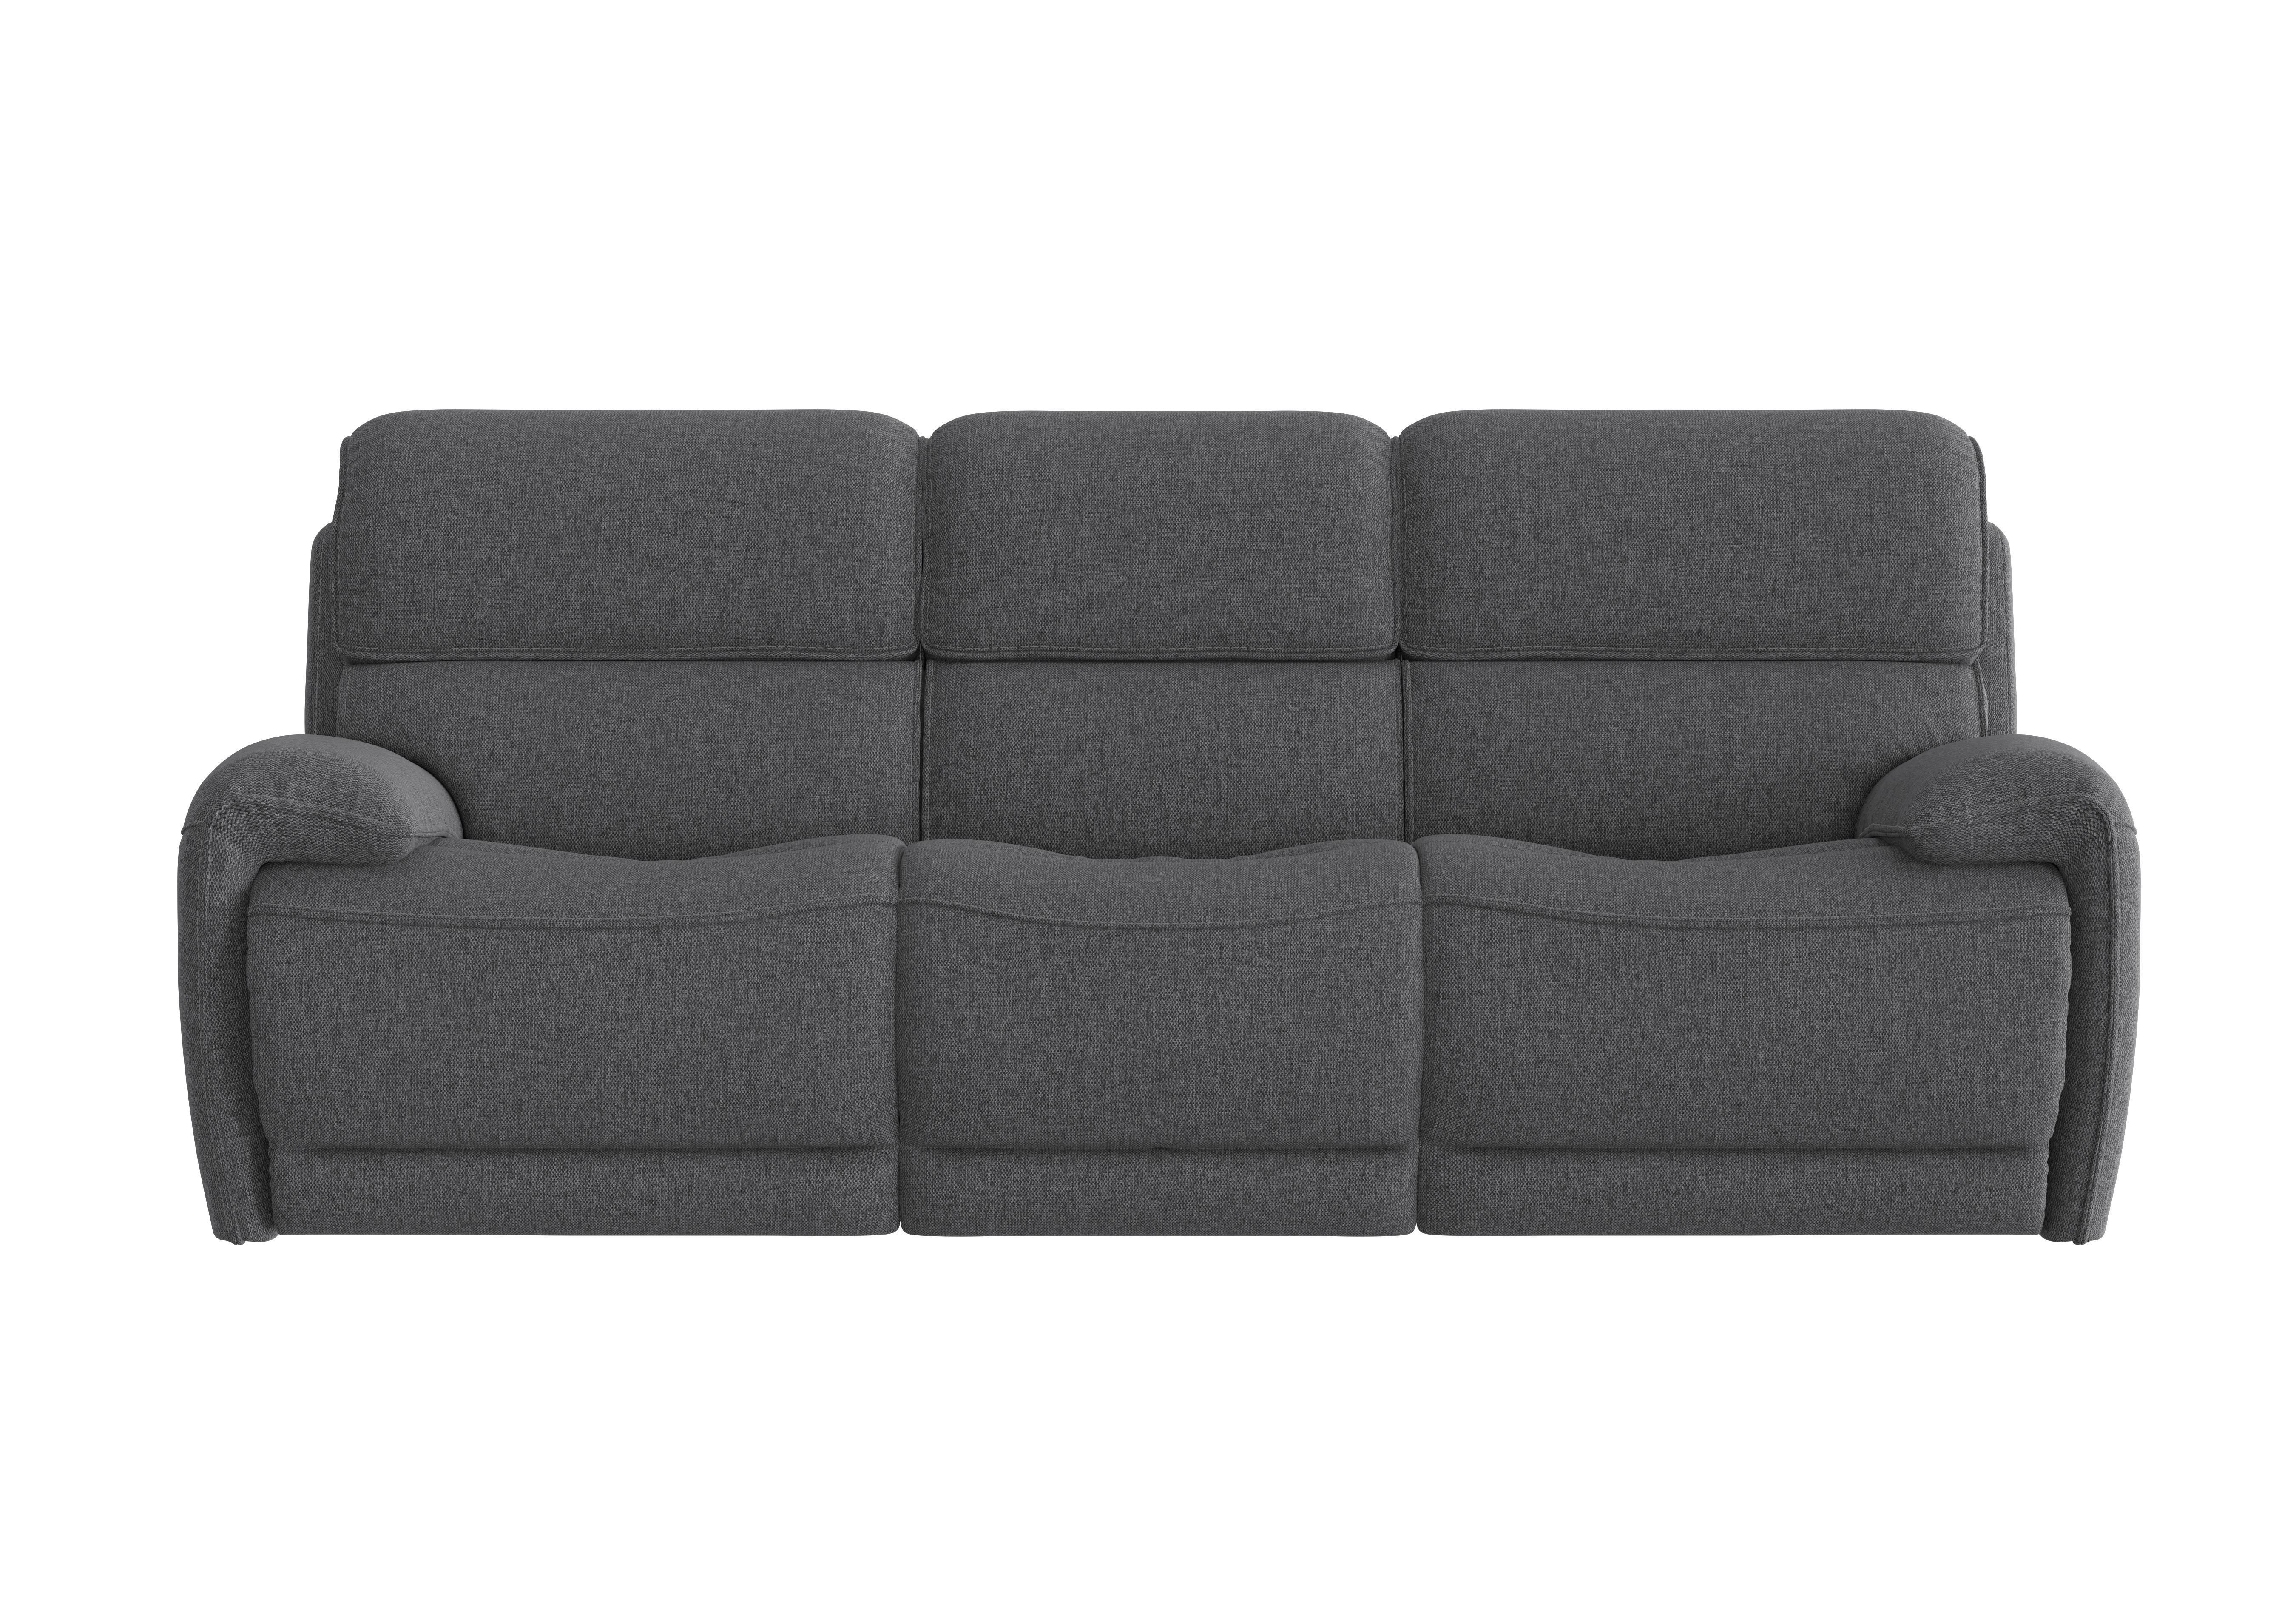 Link 3 Seater Fabric Power Recliner Sofa with Power Headrests in Fab-Blt-R39 Charcoal on Furniture Village